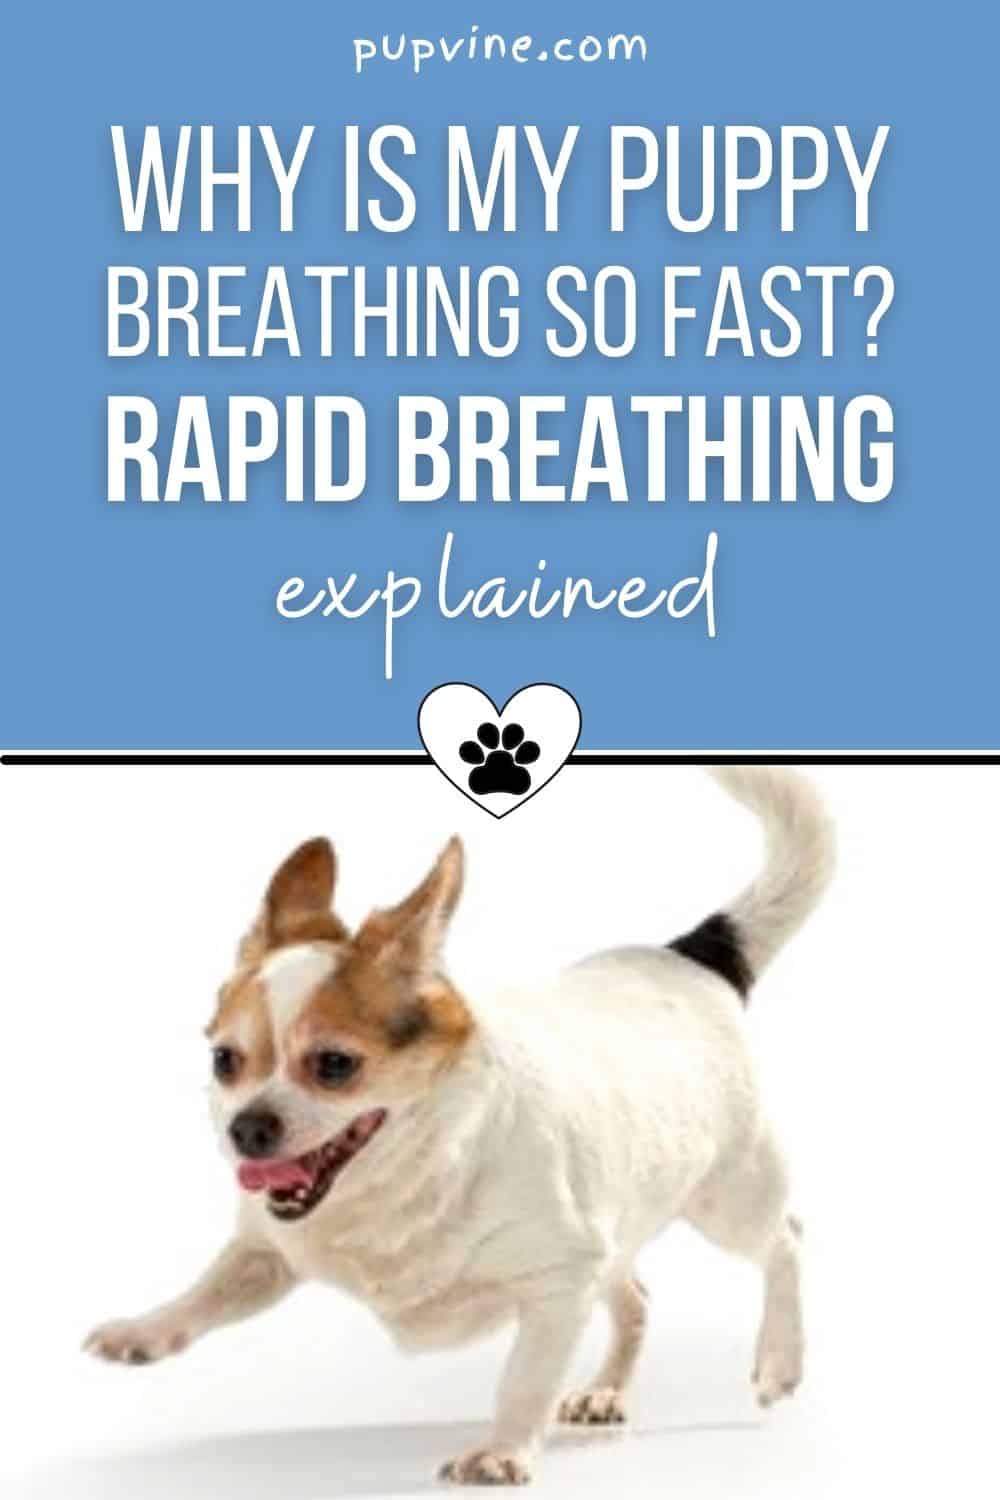 Why Is My Puppy Breathing So Fast? Rapid Breathing Explained